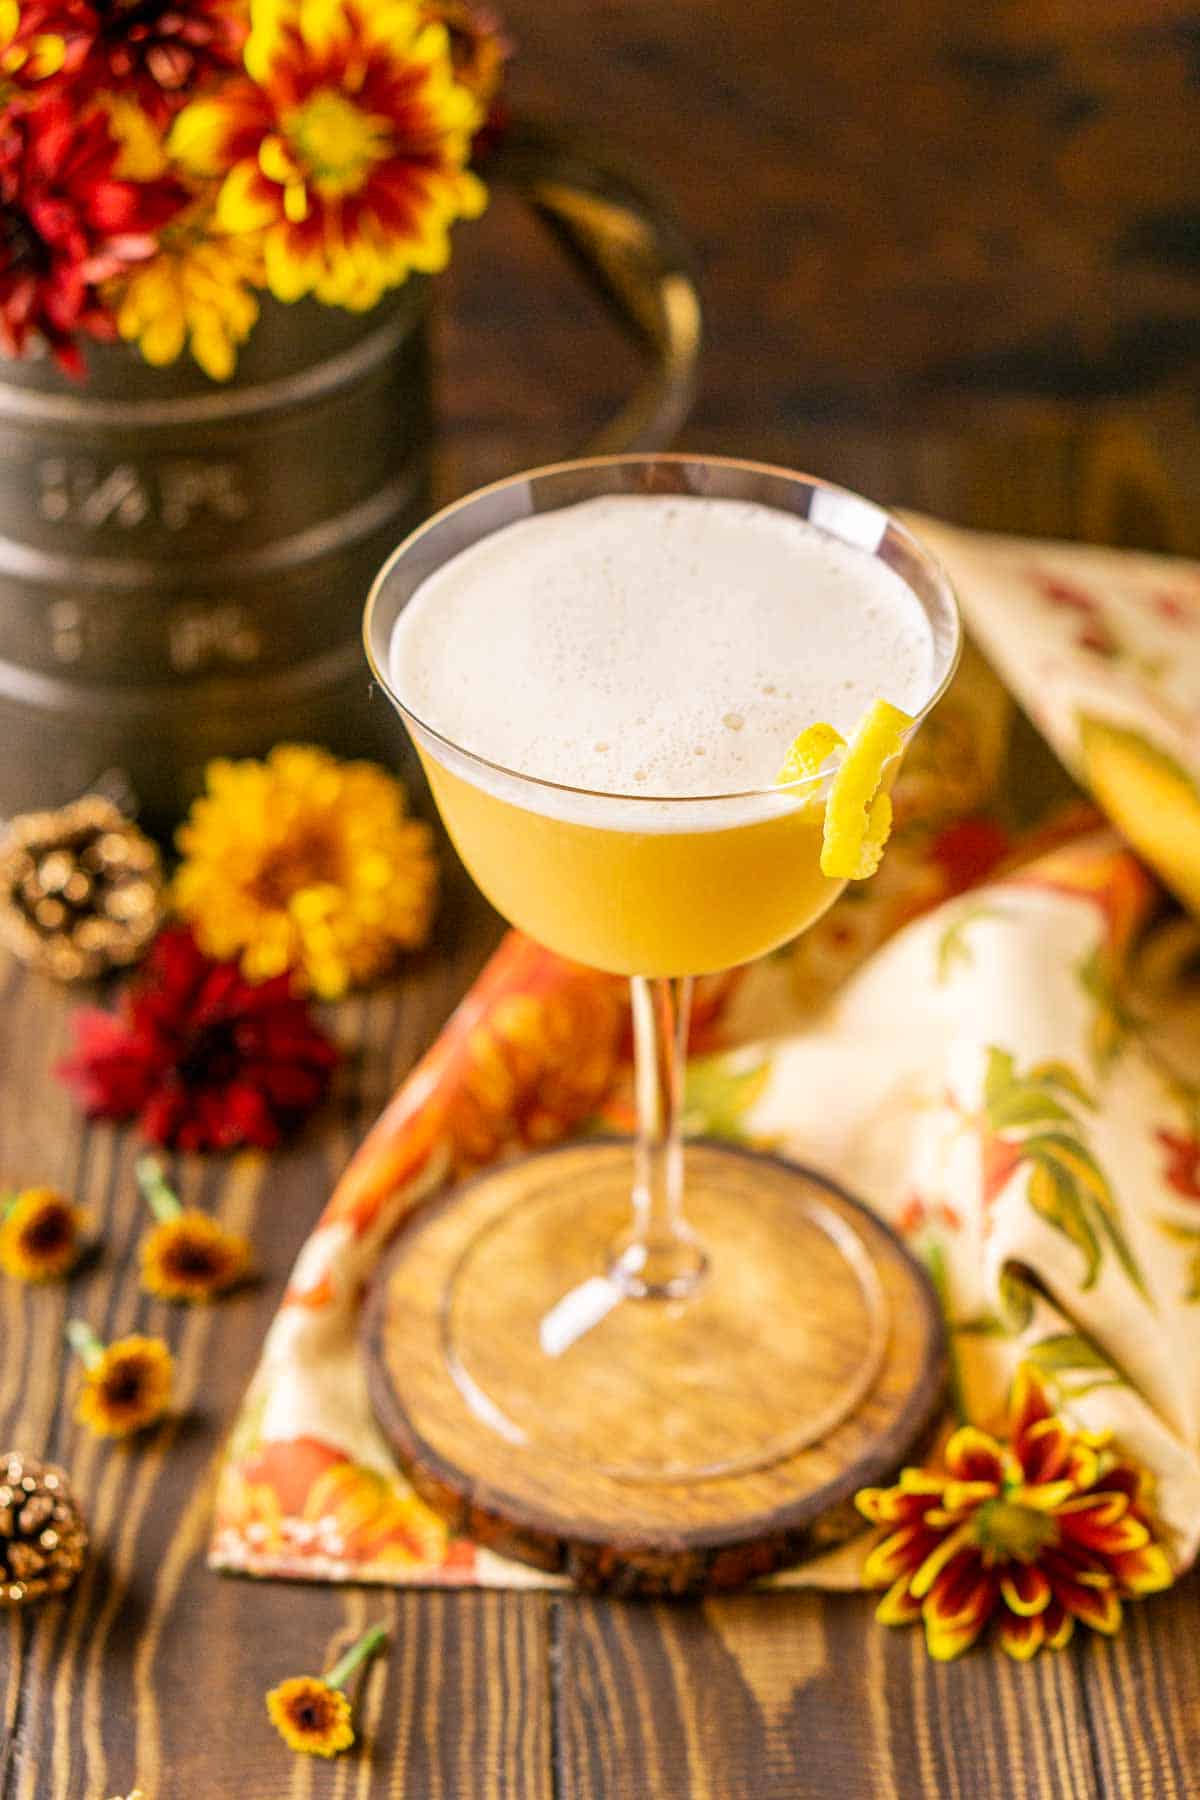 Looking down on the frothy topping of the maple whiskey sour with fall flowers scattered around it.